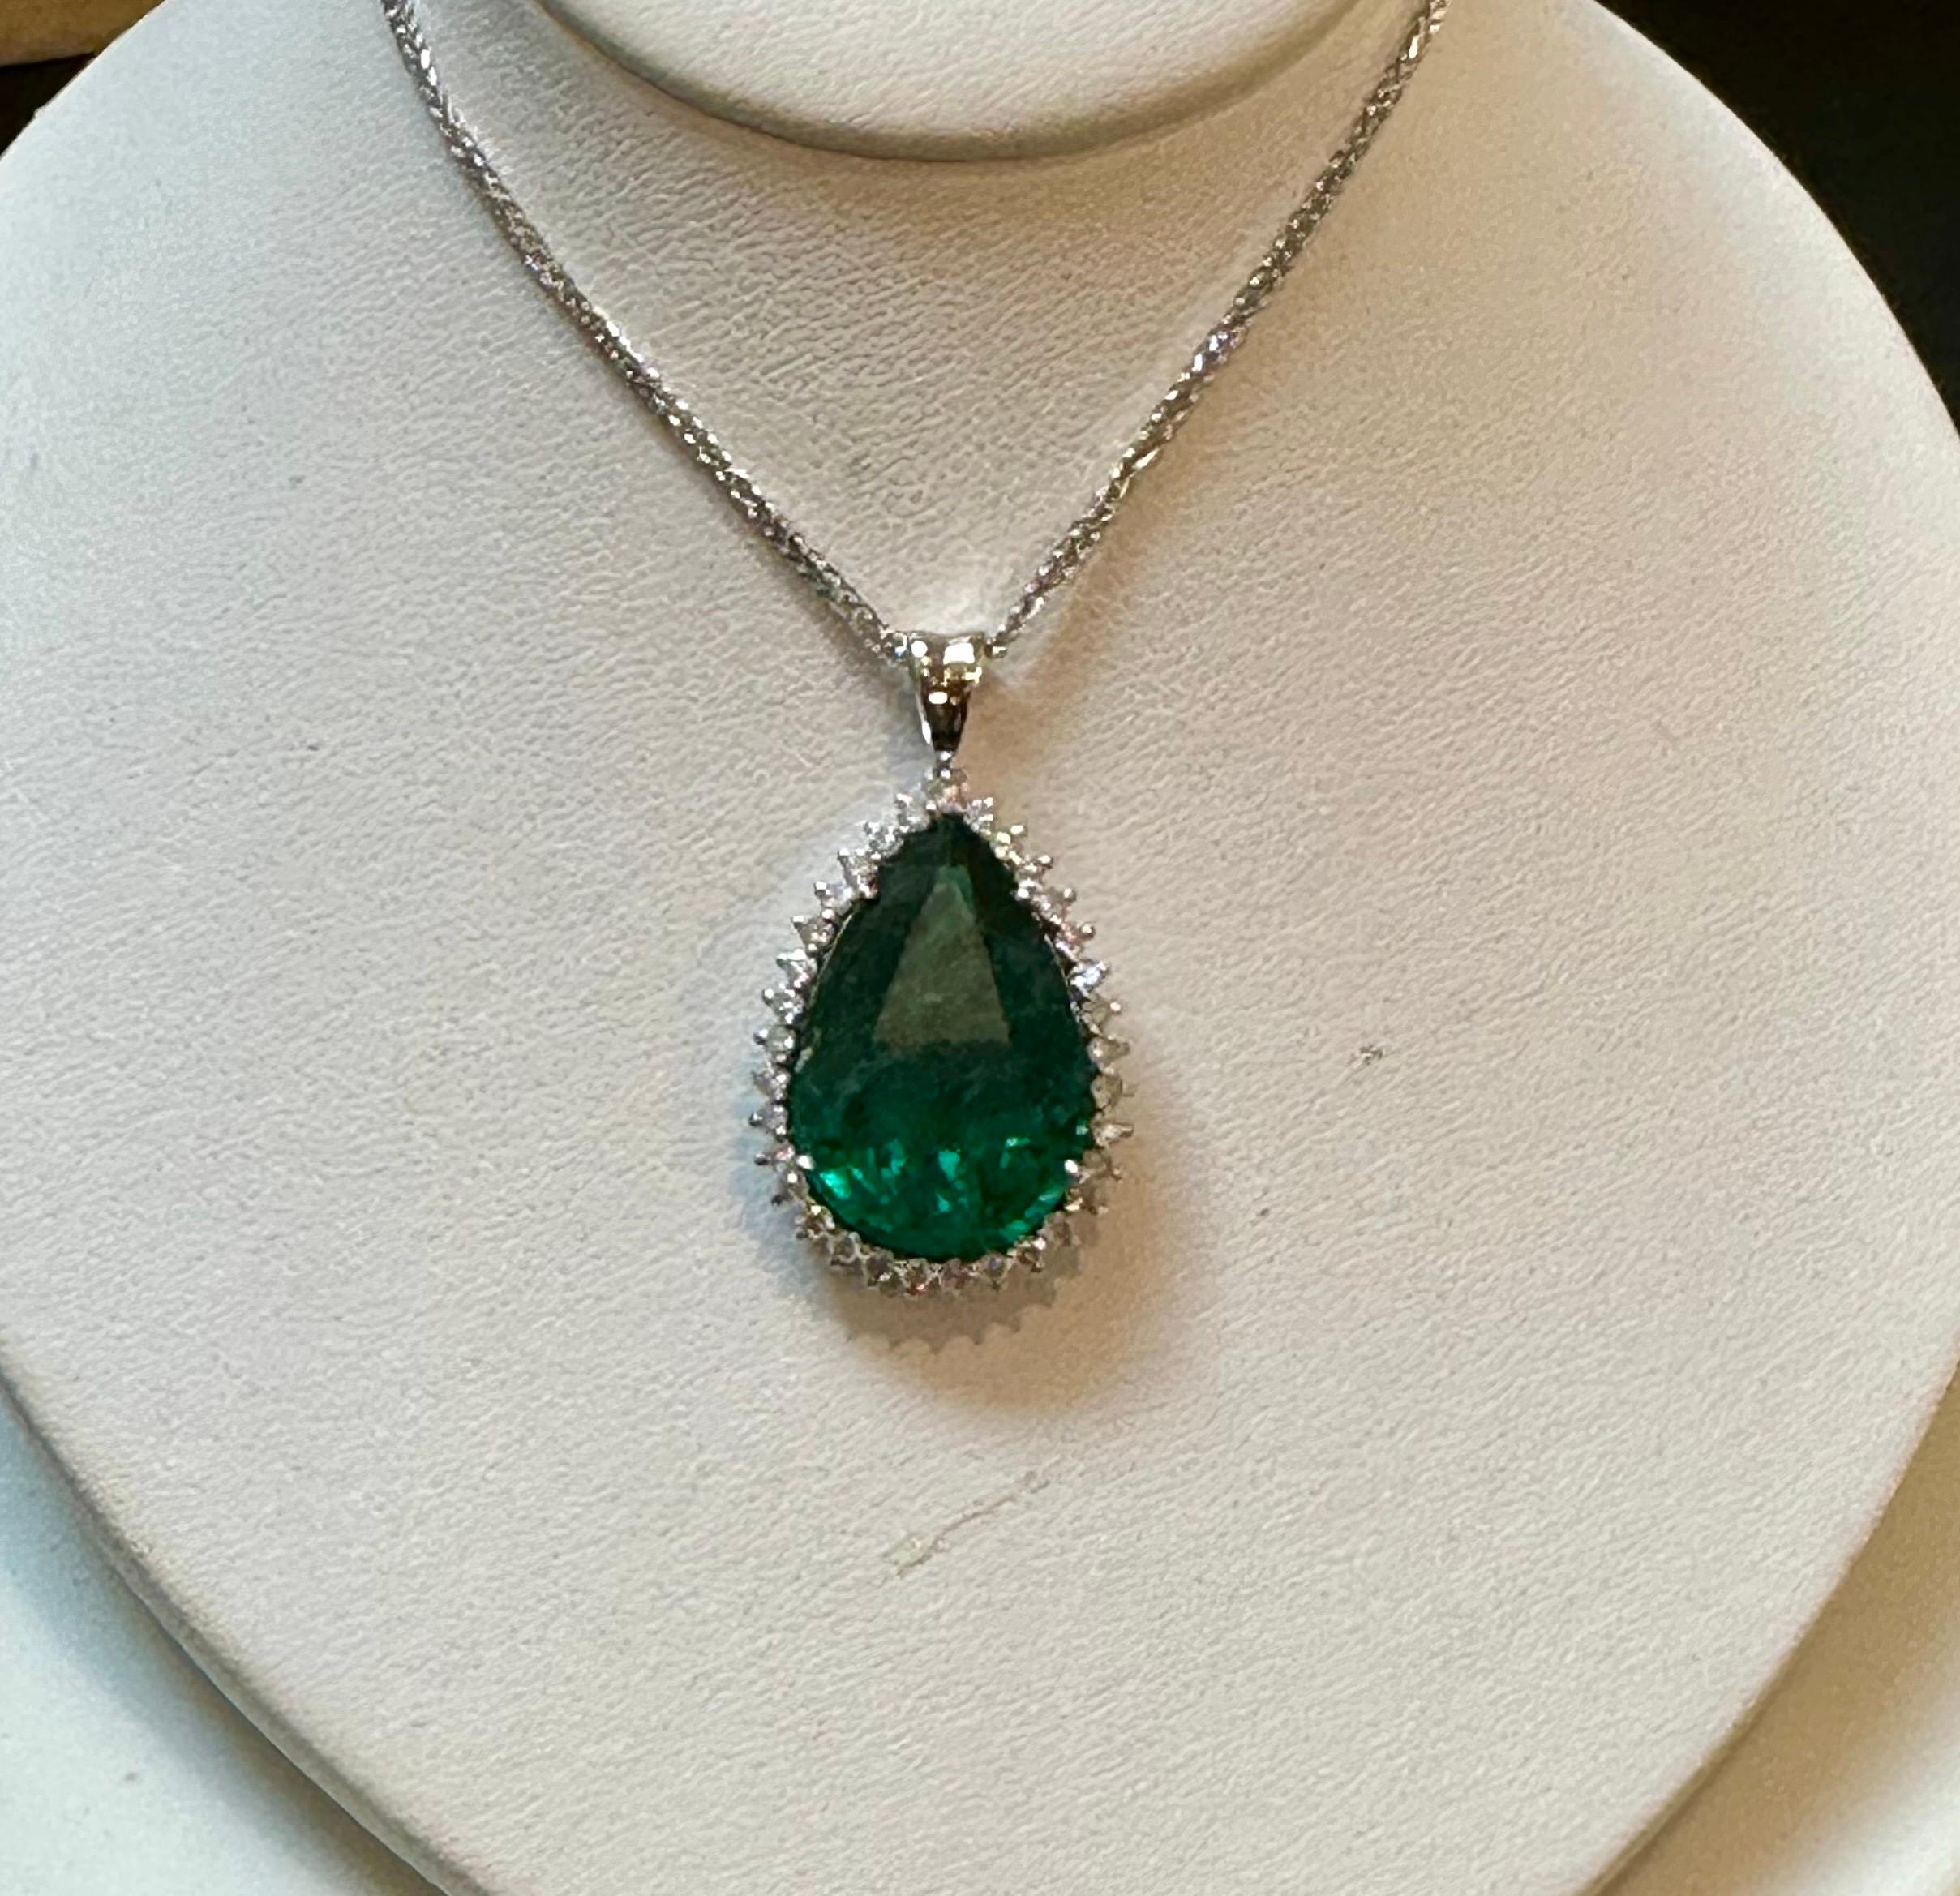 13 Ct Pear Cut Emerald & 1 Ct Diamond Halo Pendent/Necklace 14 KW Gold Chain 7